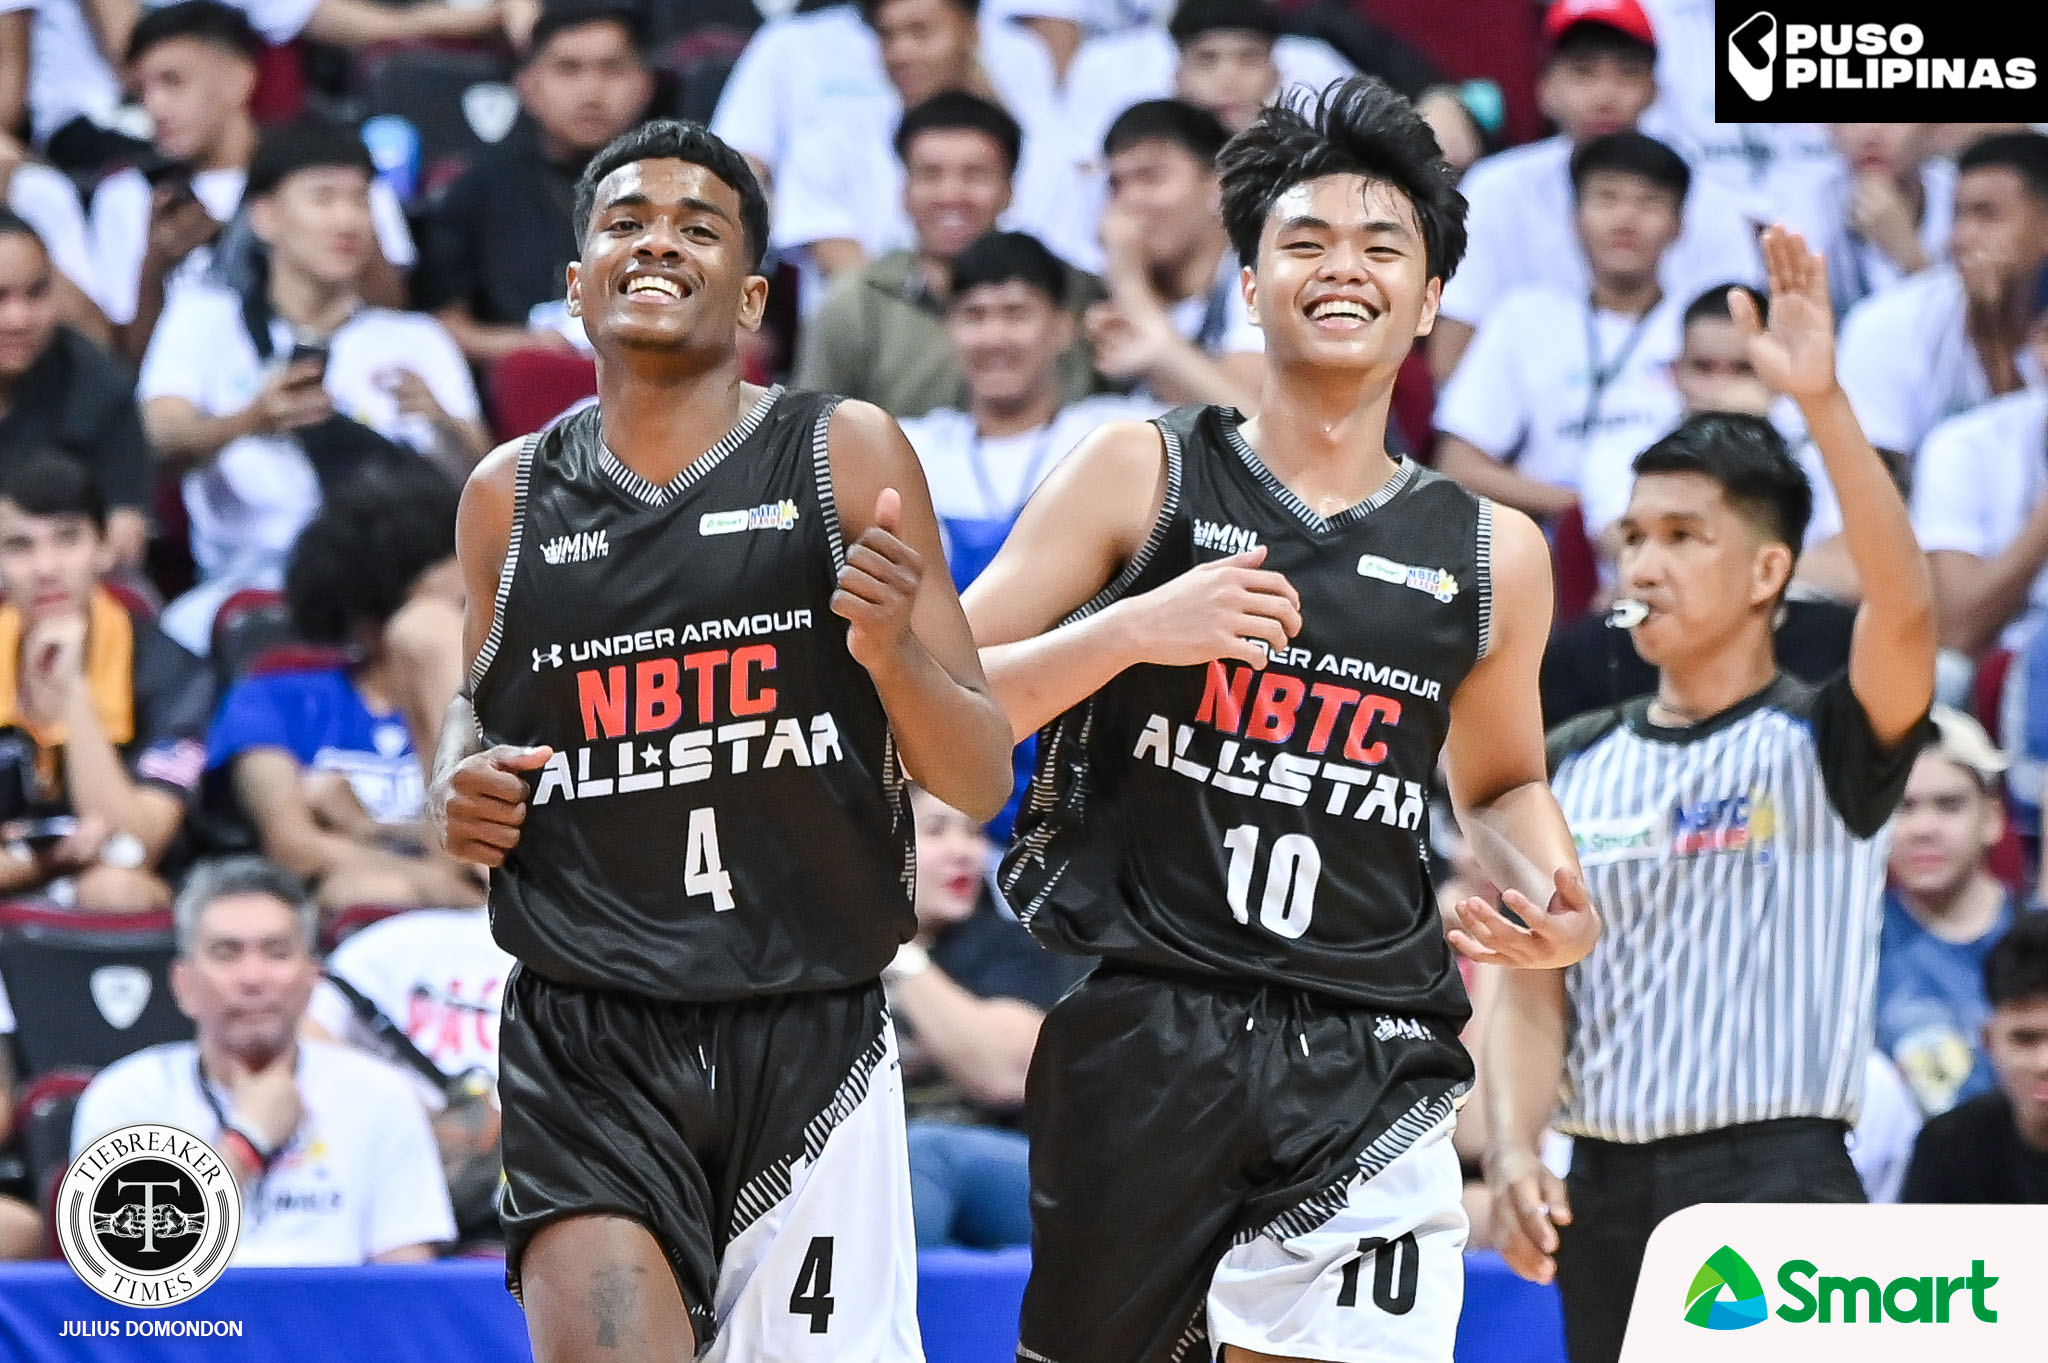 2023-NBTC-All-Star-SJ-MOORE-AMIEL-ACIDO-1379 SJ Moore glad to prove that he is one of the best HS prospects AU Basketball NBTC News  - philippine sports news